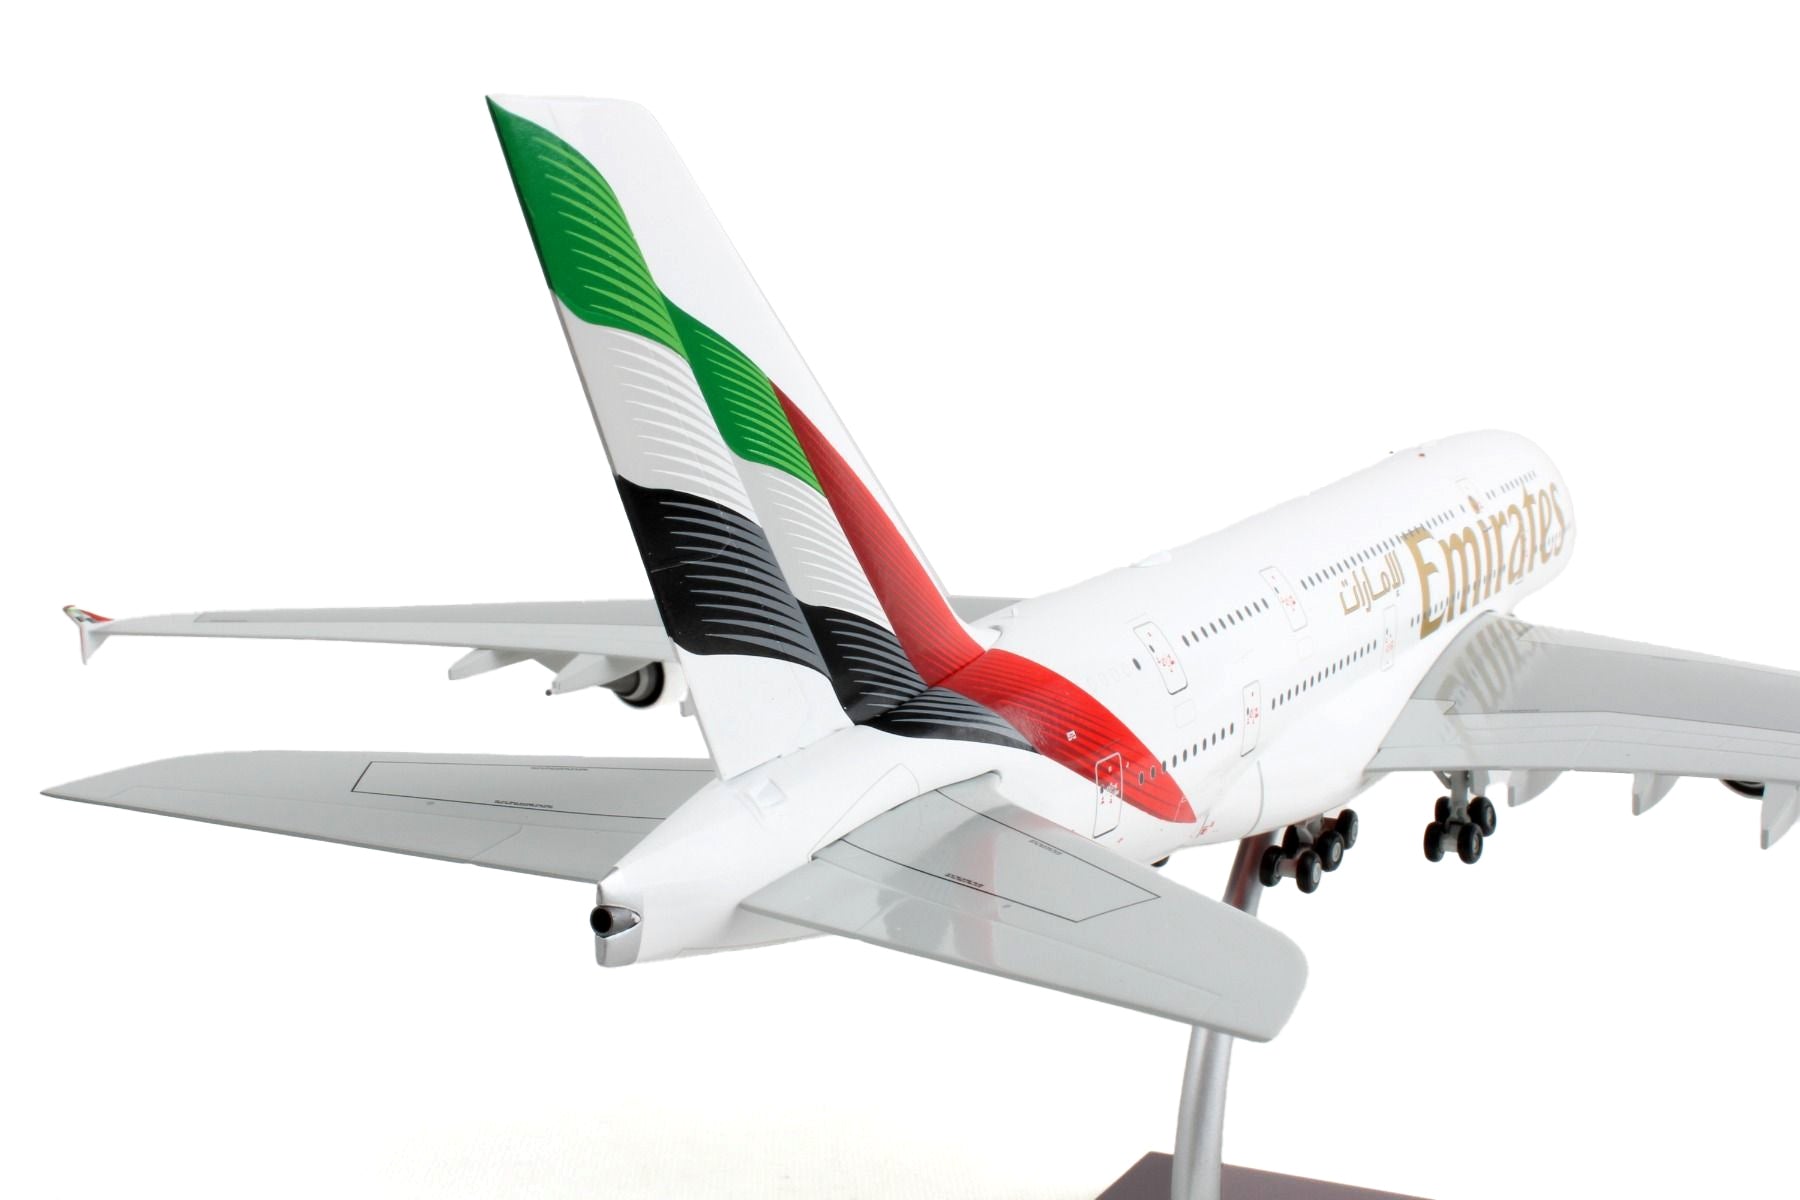 Airbus A380-800 Commercial Aircraft "Emirates Airlines - New Livery" White with Striped Tail